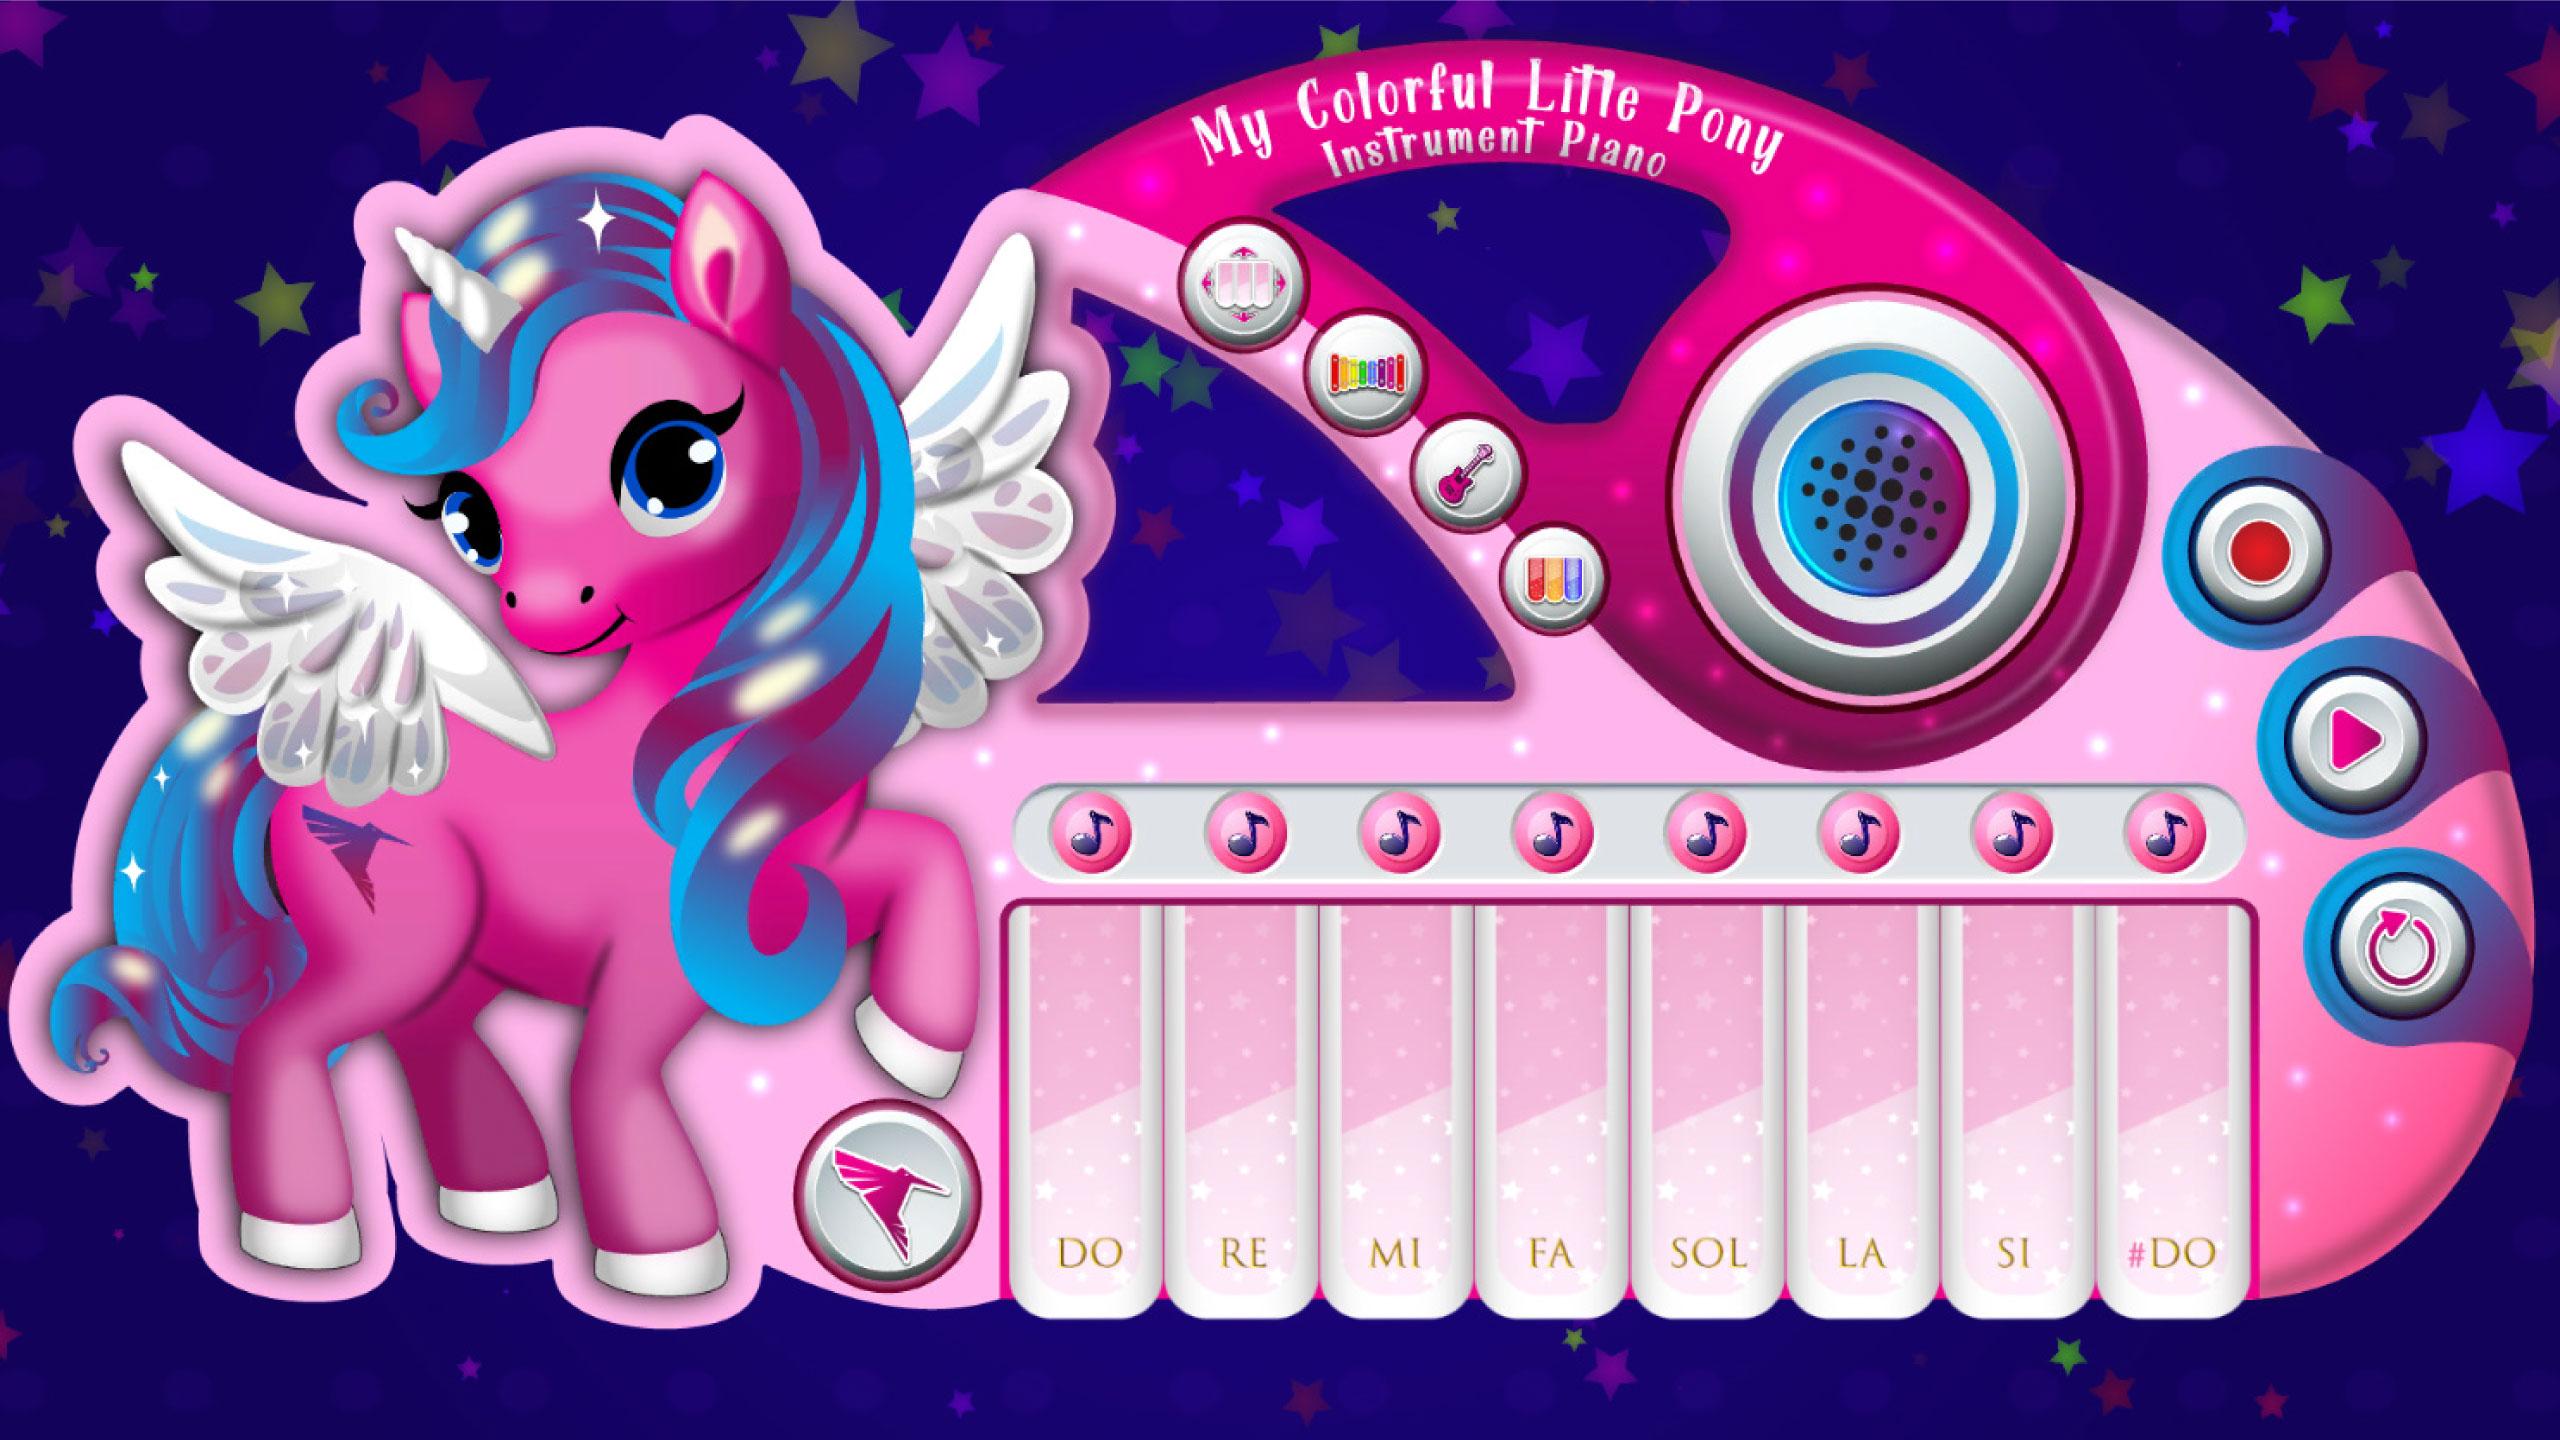 My Colorful Litle Pony Instrument - Piano 2.0 Screenshot 9